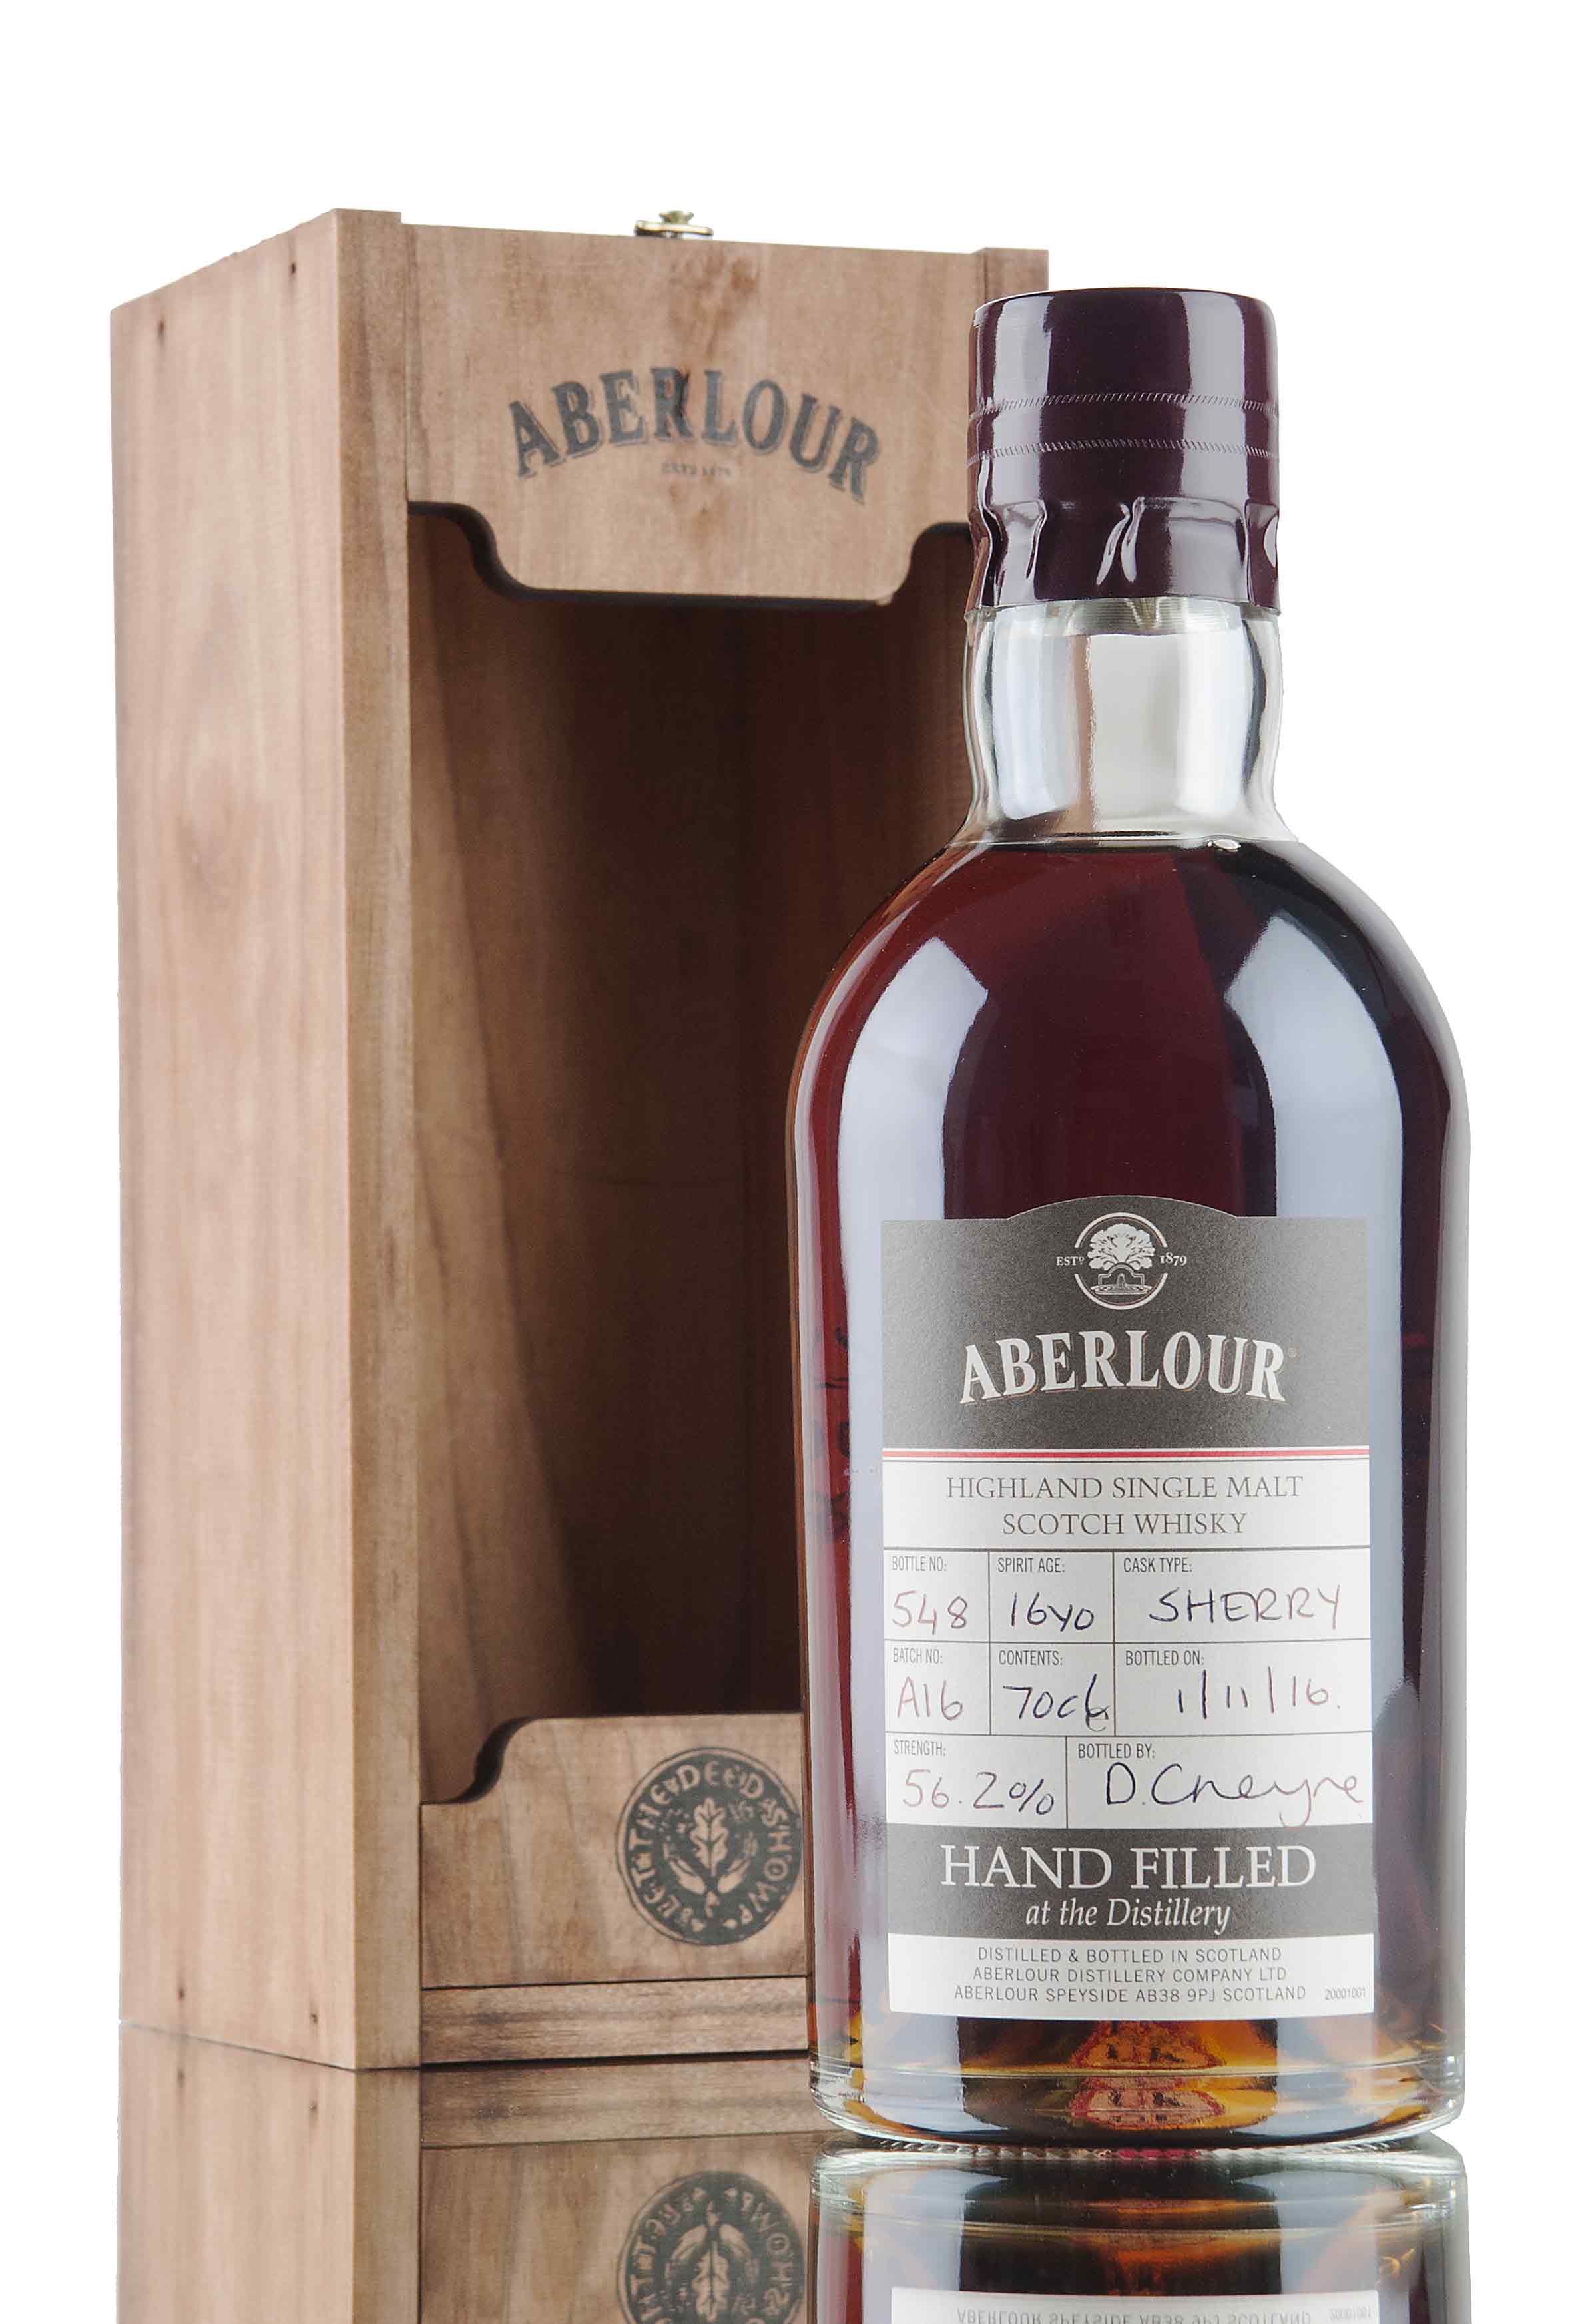 Aberlour 16 Year Old Hand Filled / Batch A16 Sherry Cask